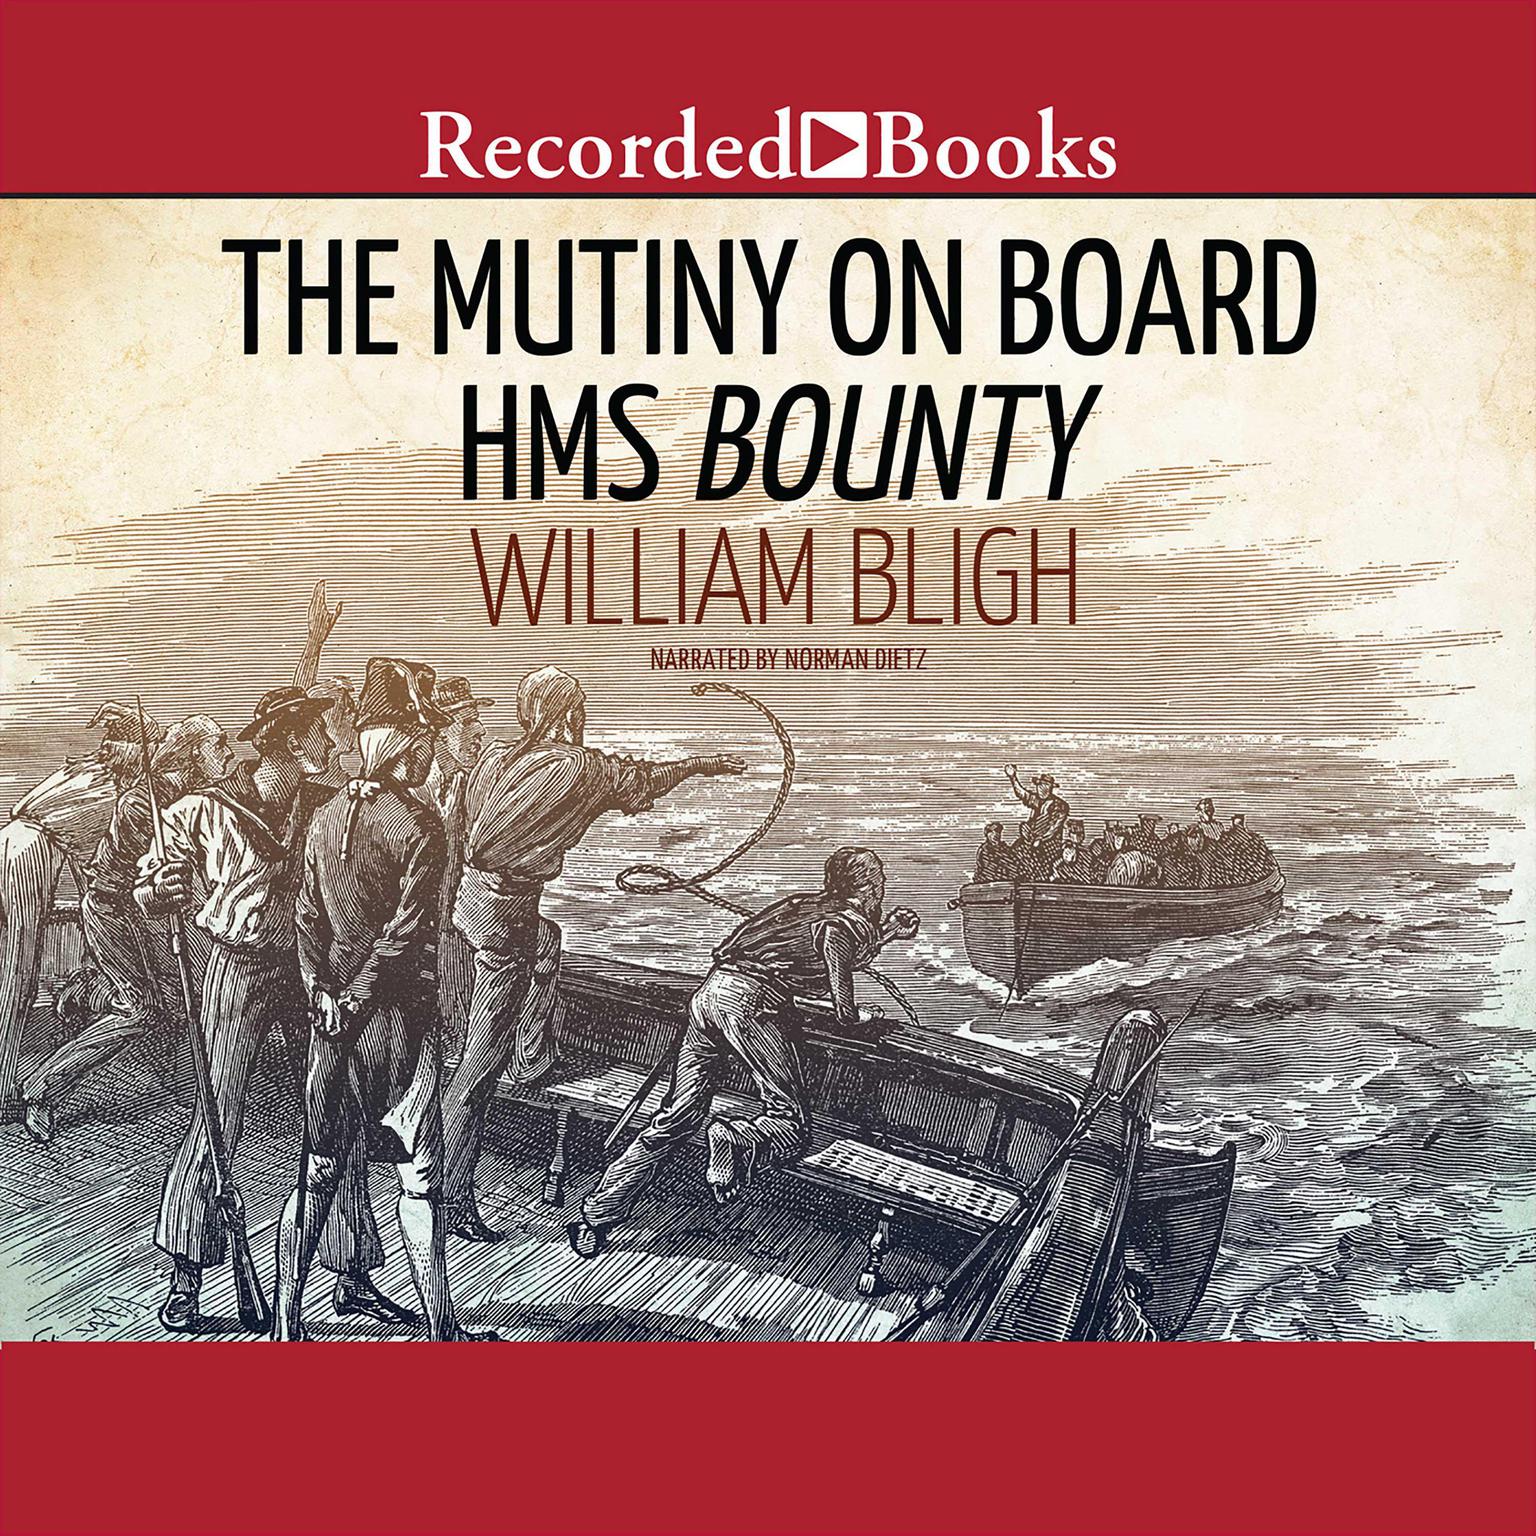 The Mutiny on Board H.M.S. Bounty: A Voyage to the South Sea and the Terrible Mutiny on Board Audiobook, by William Bligh